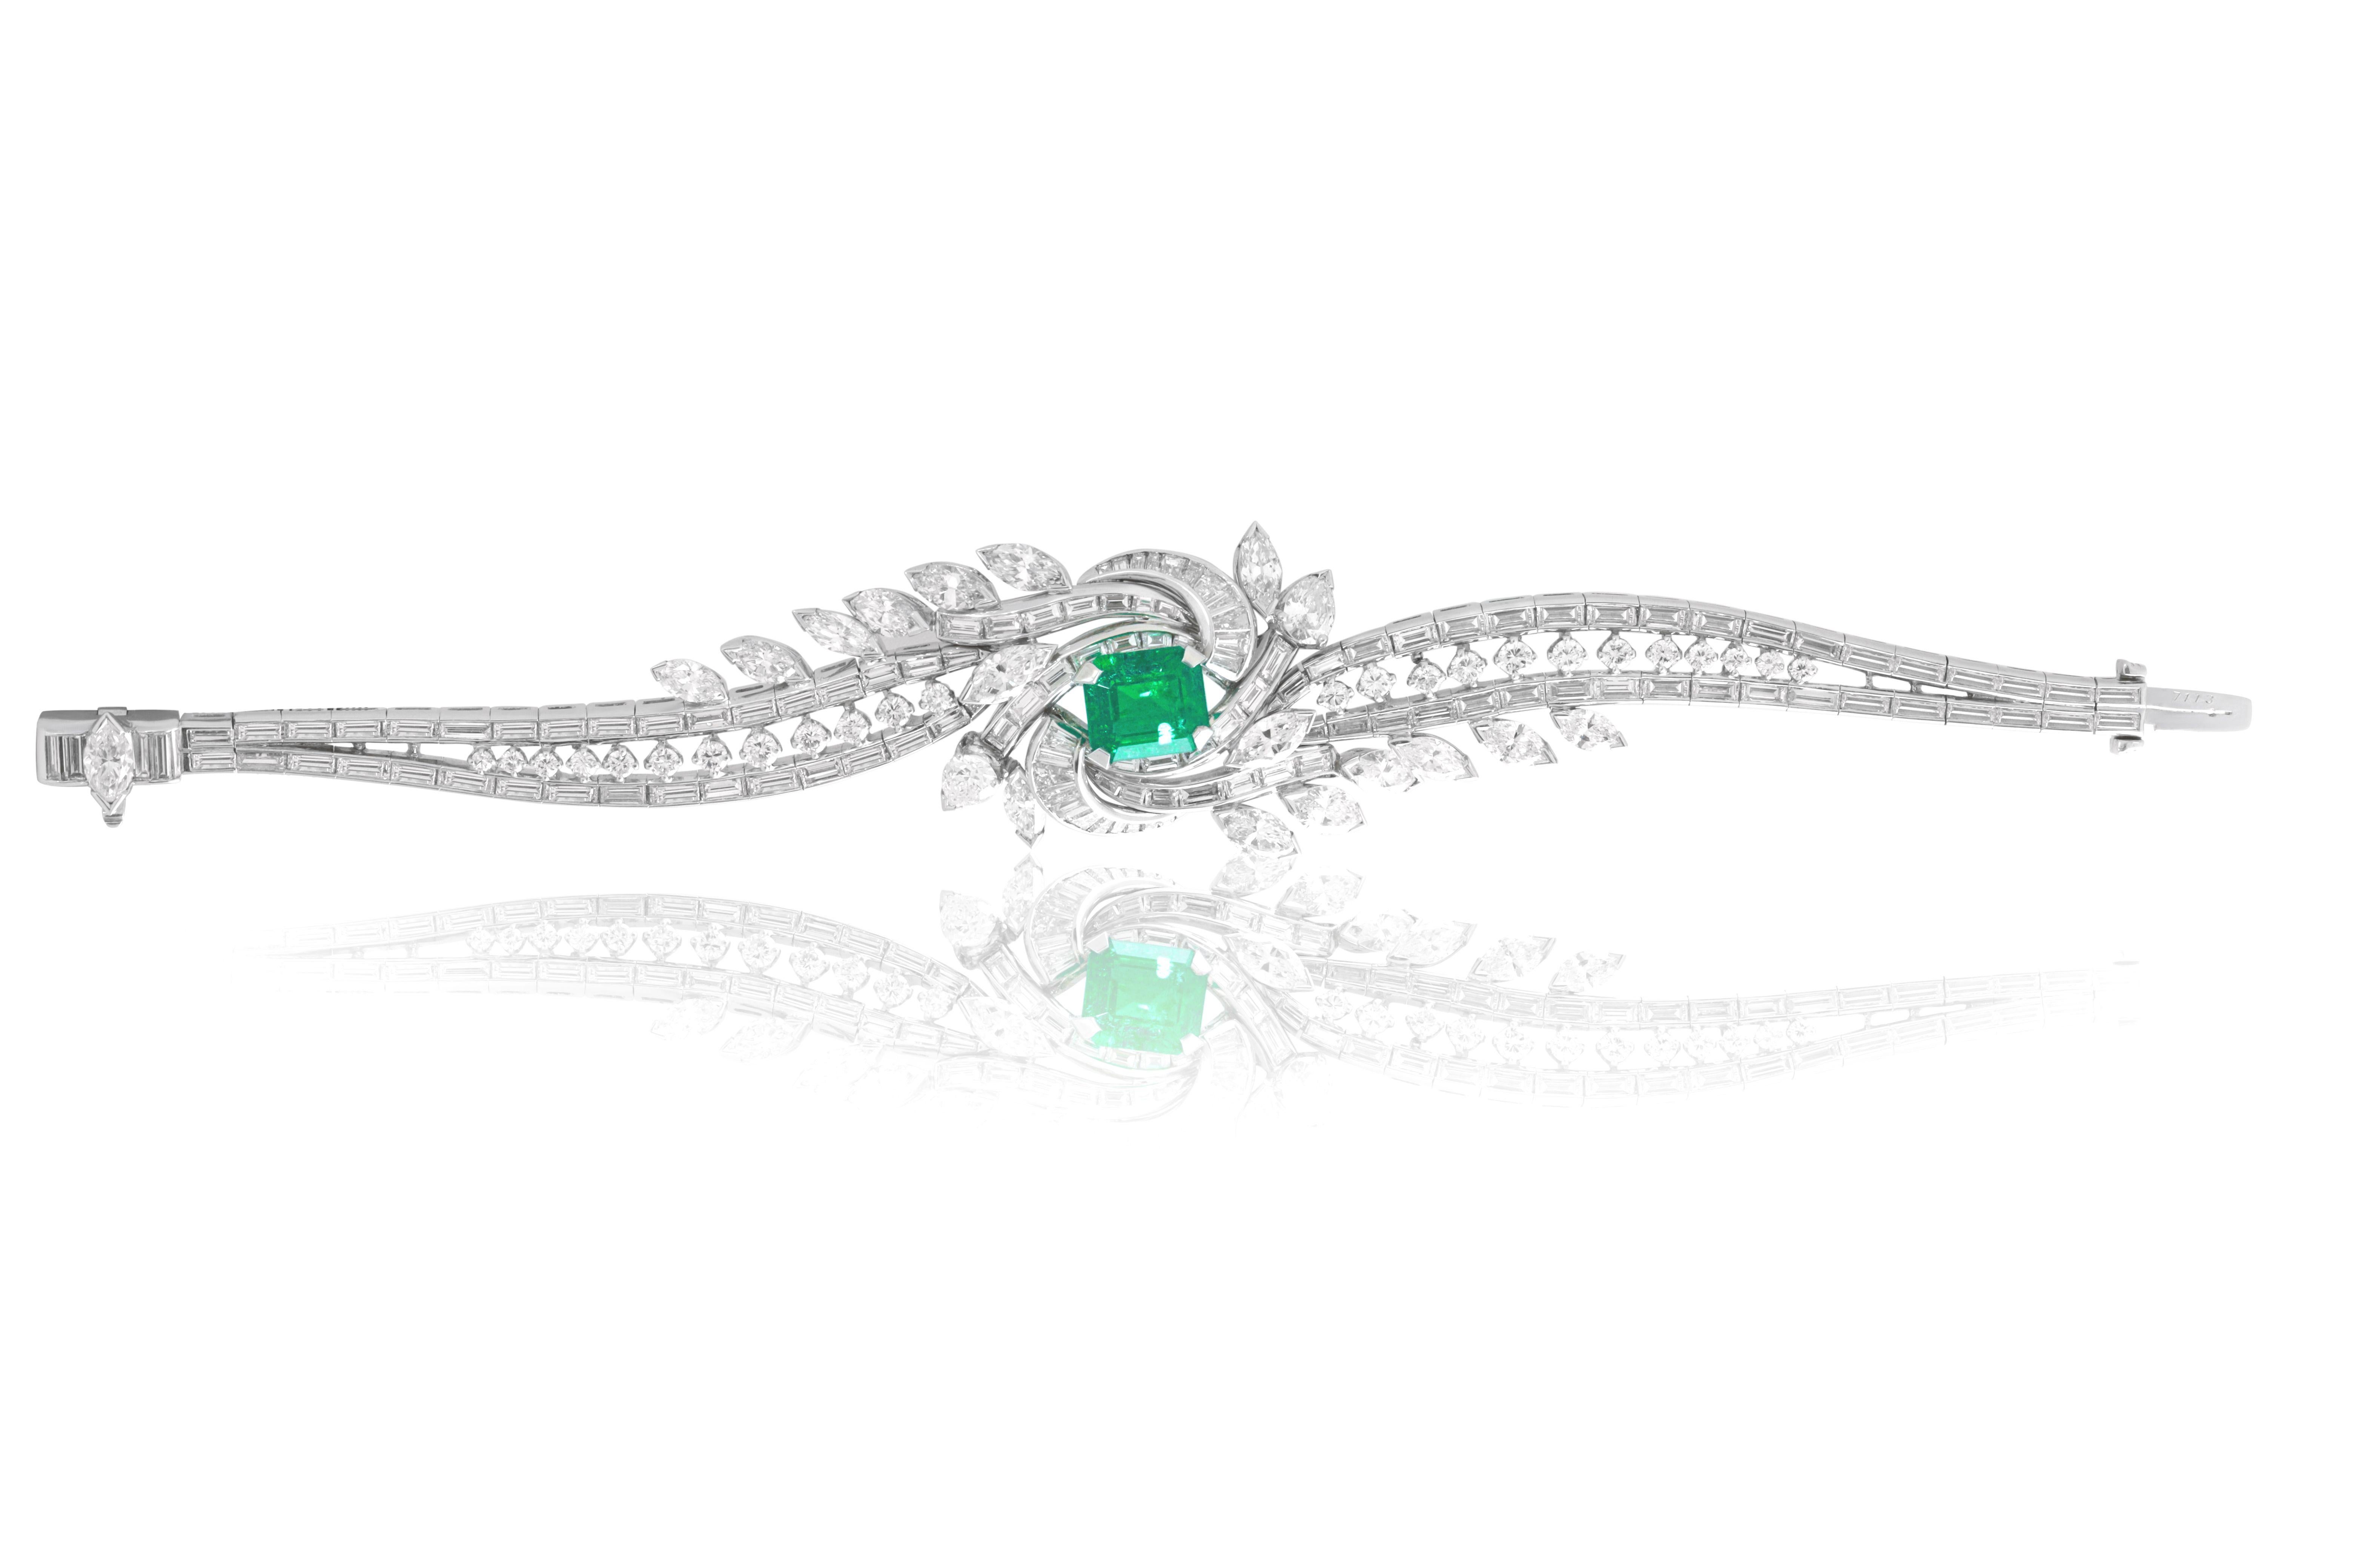 Platinum fashion bracelet with a center whirlpool-shaped design adorne with emerald cut diamonds surrounding a 3.05 cts tw square cut emerald and a center row of round diamonds surrounded with 2 rows of emerald cut diamonds encircling the bracelet